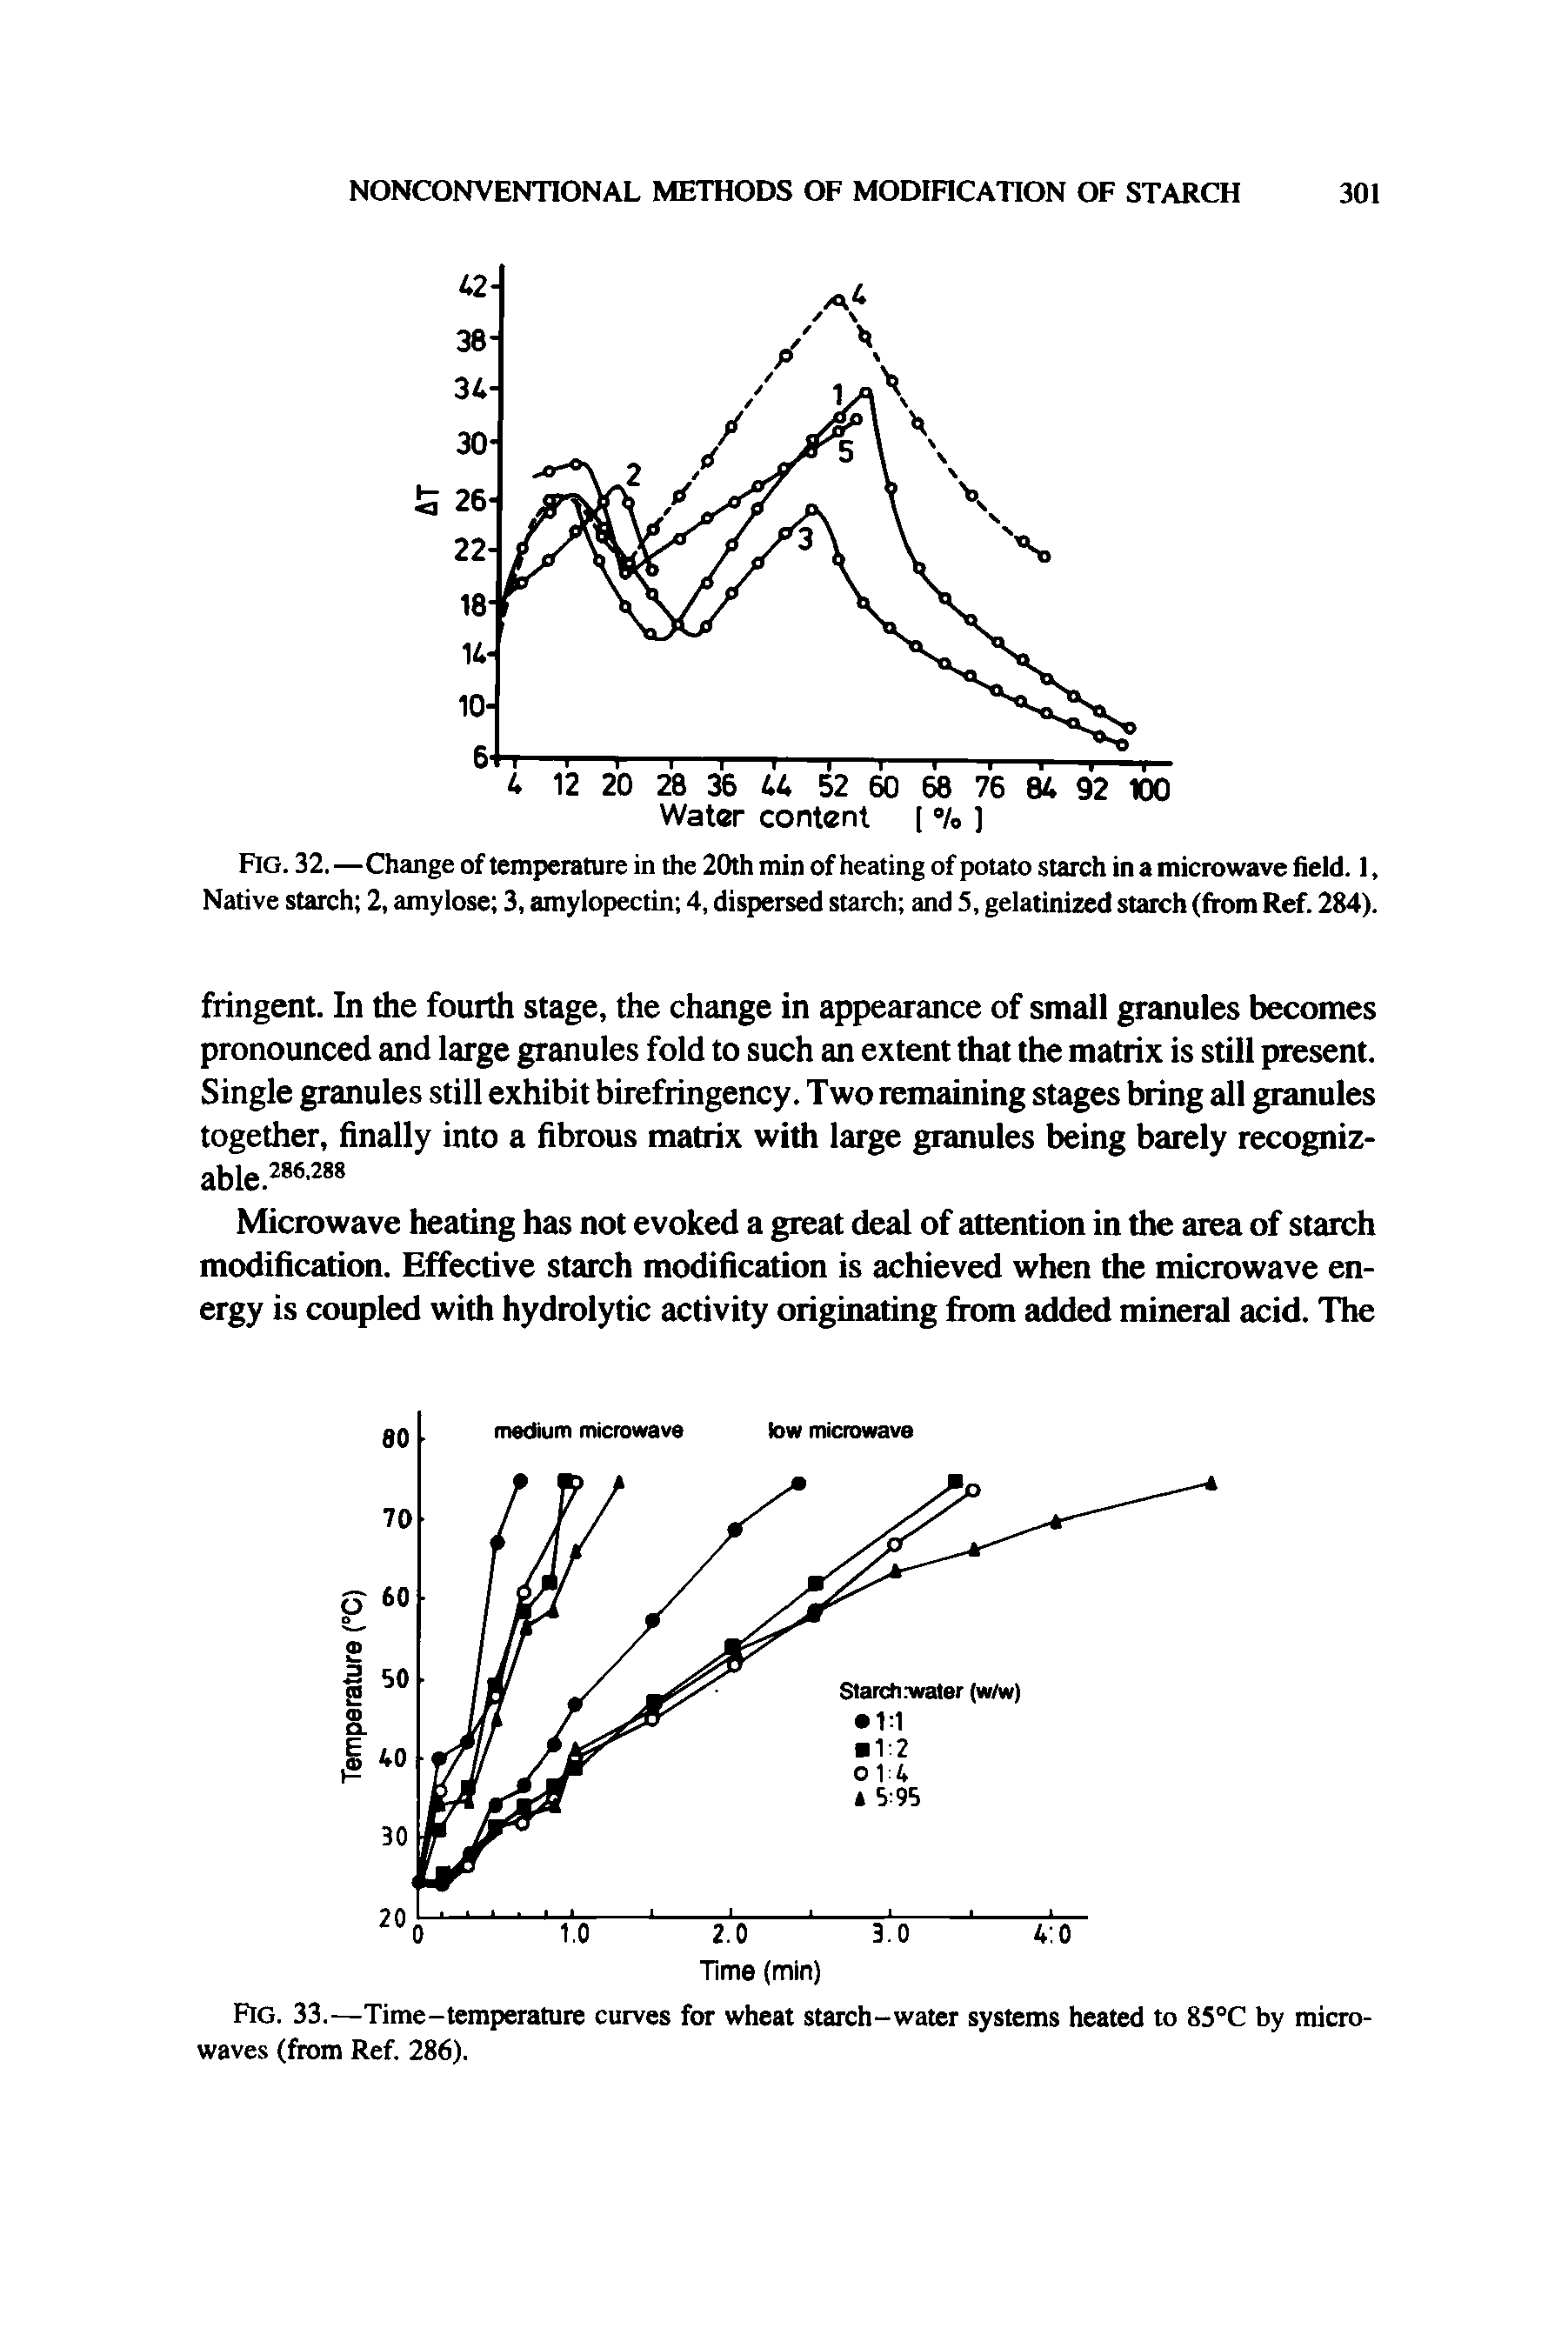 Fig. 33.—Time-temperature curves for wheat starch-water systems heated to 85°C by micro-waves (from Ref. 286).